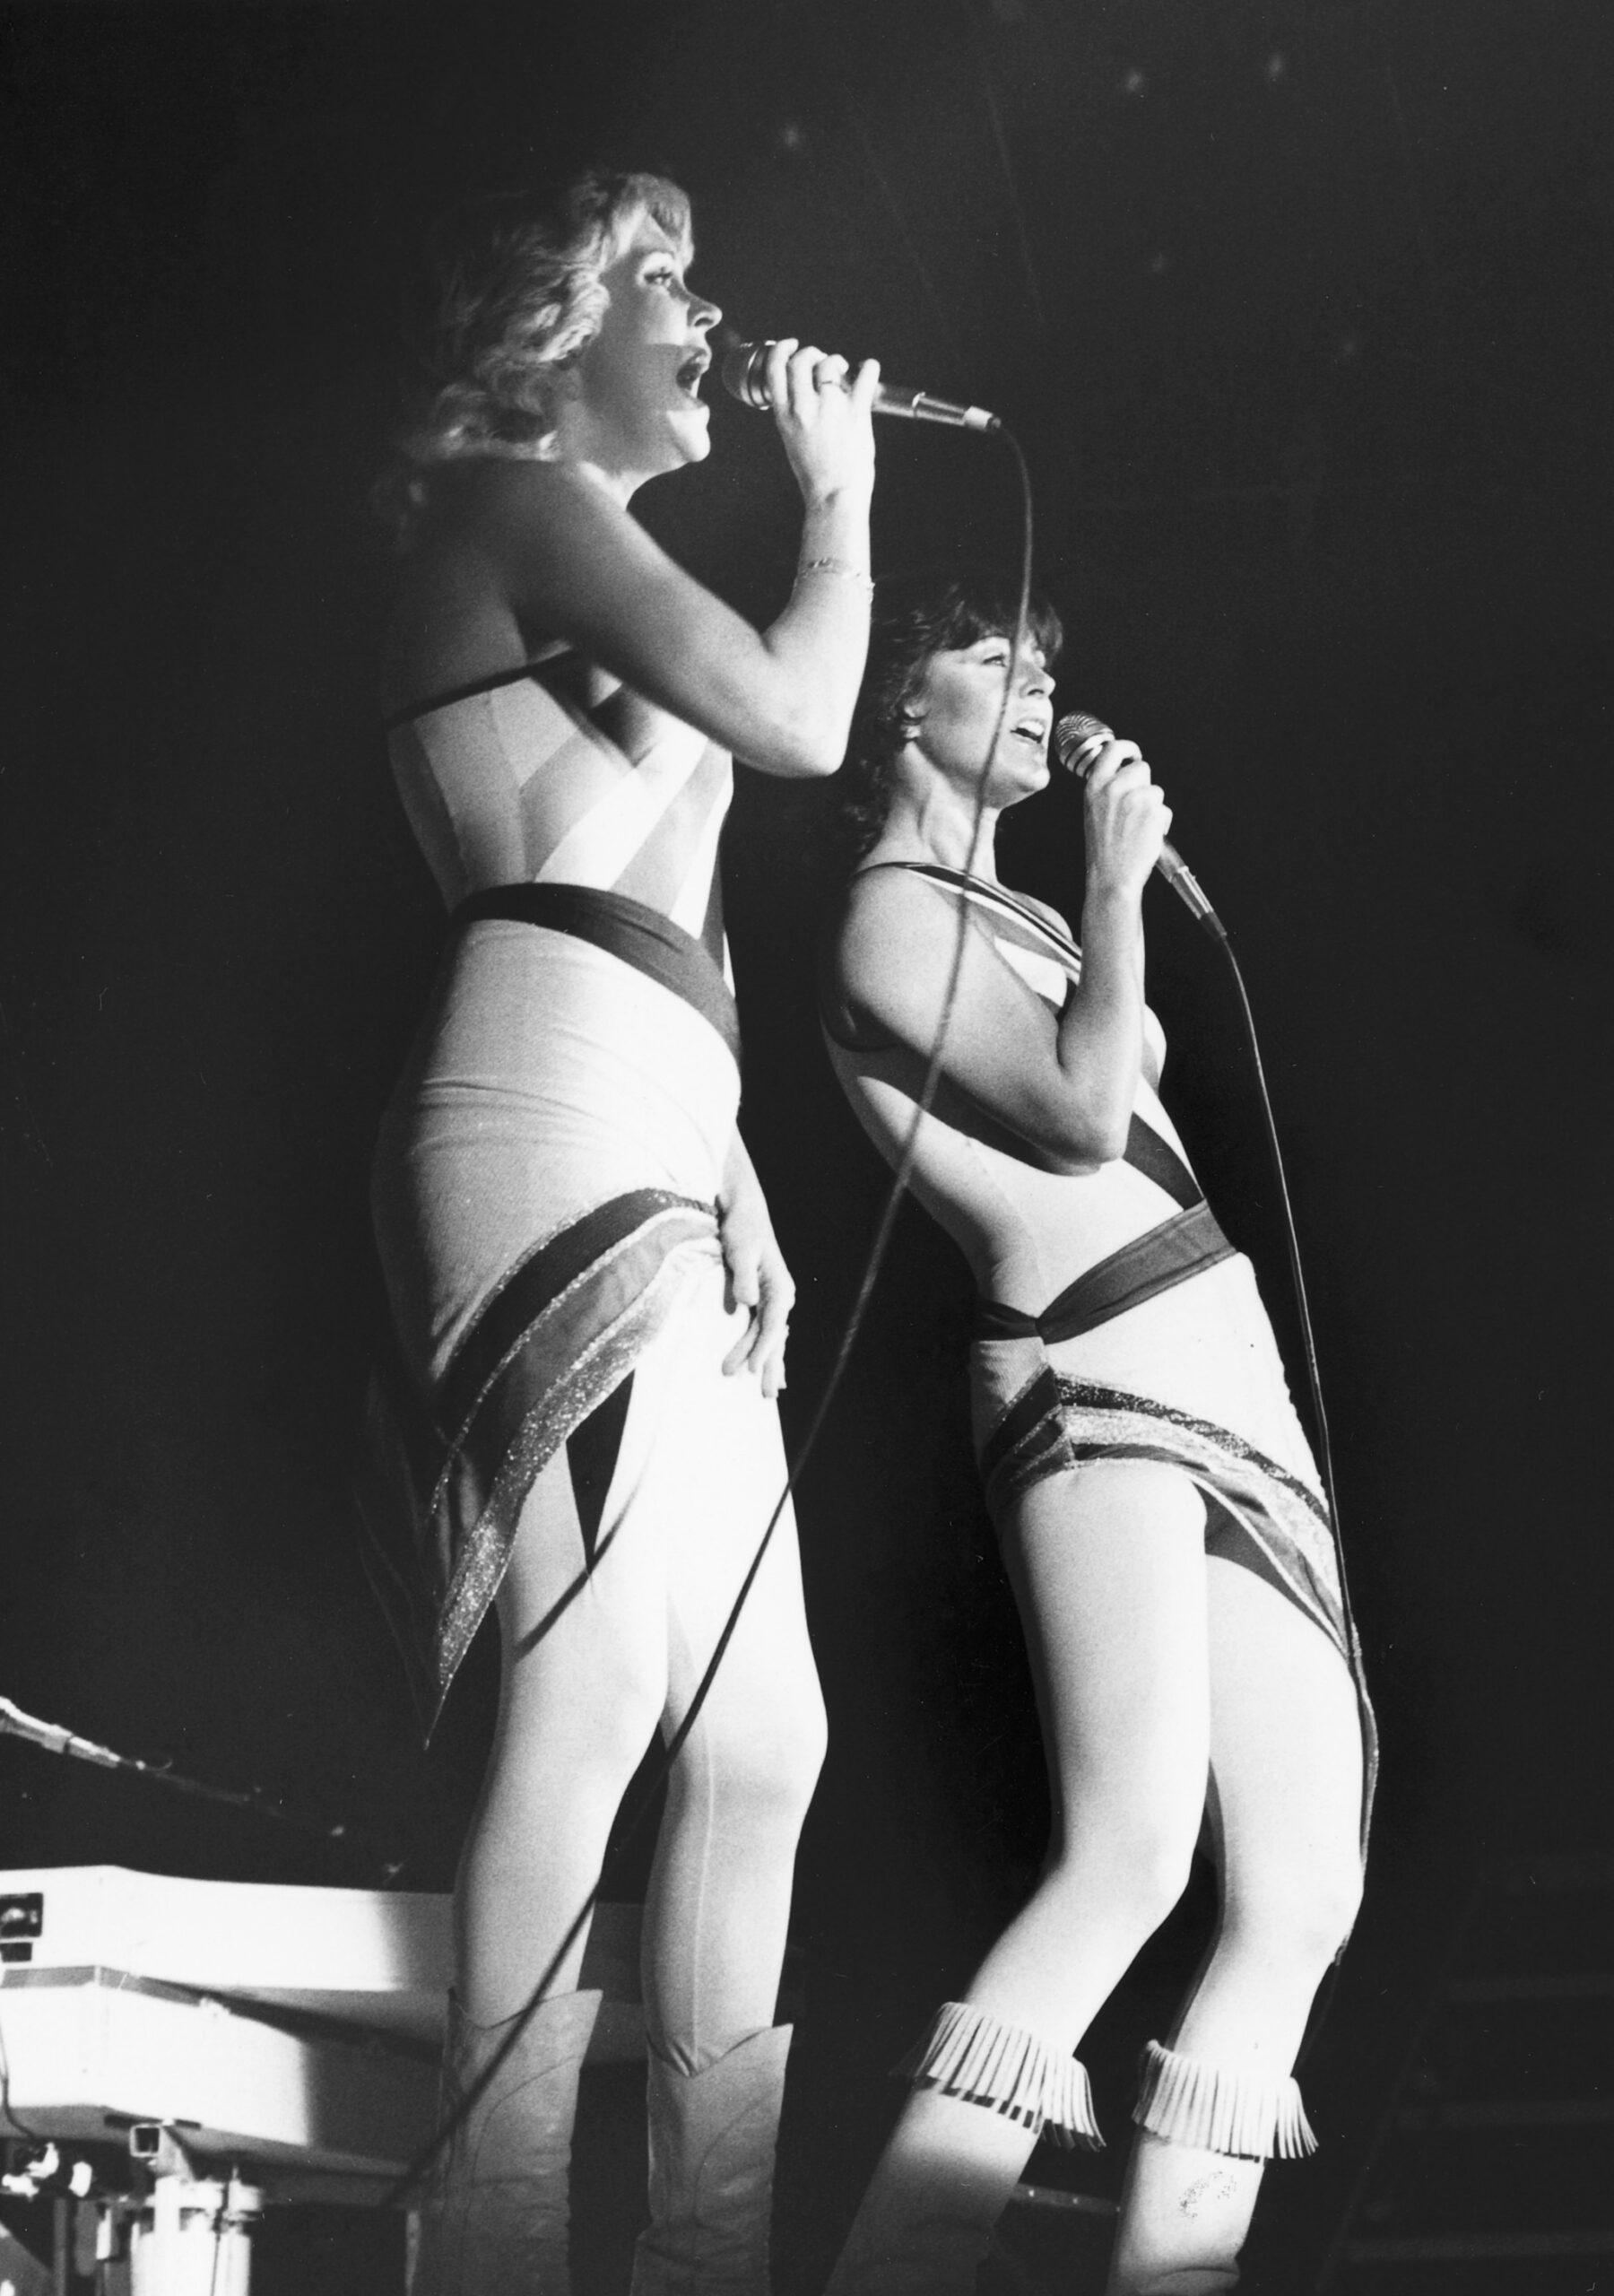 A black-and-white photo showing ABBA's Agnetha Fältskog and Anni-Frid Lyngstad singing on stage.